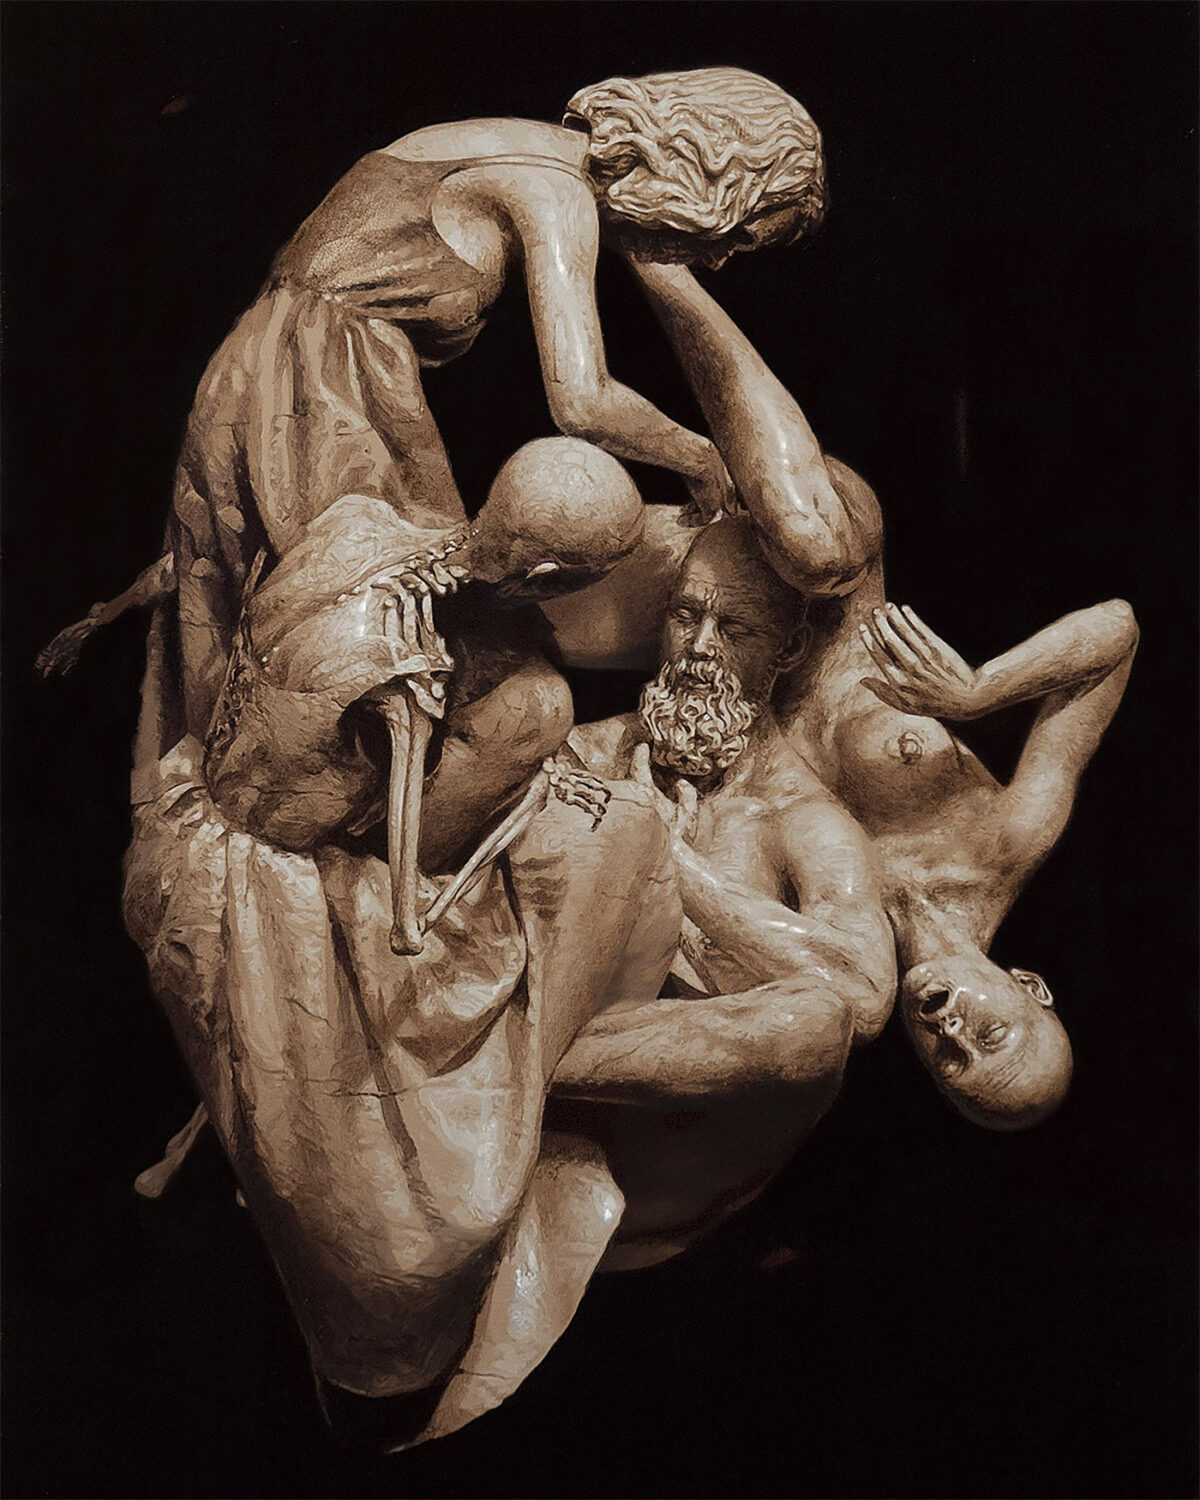 Weave, Surreal Paintings Of Monochromatic Hyper Realistic Figures By Ben Howe (1)